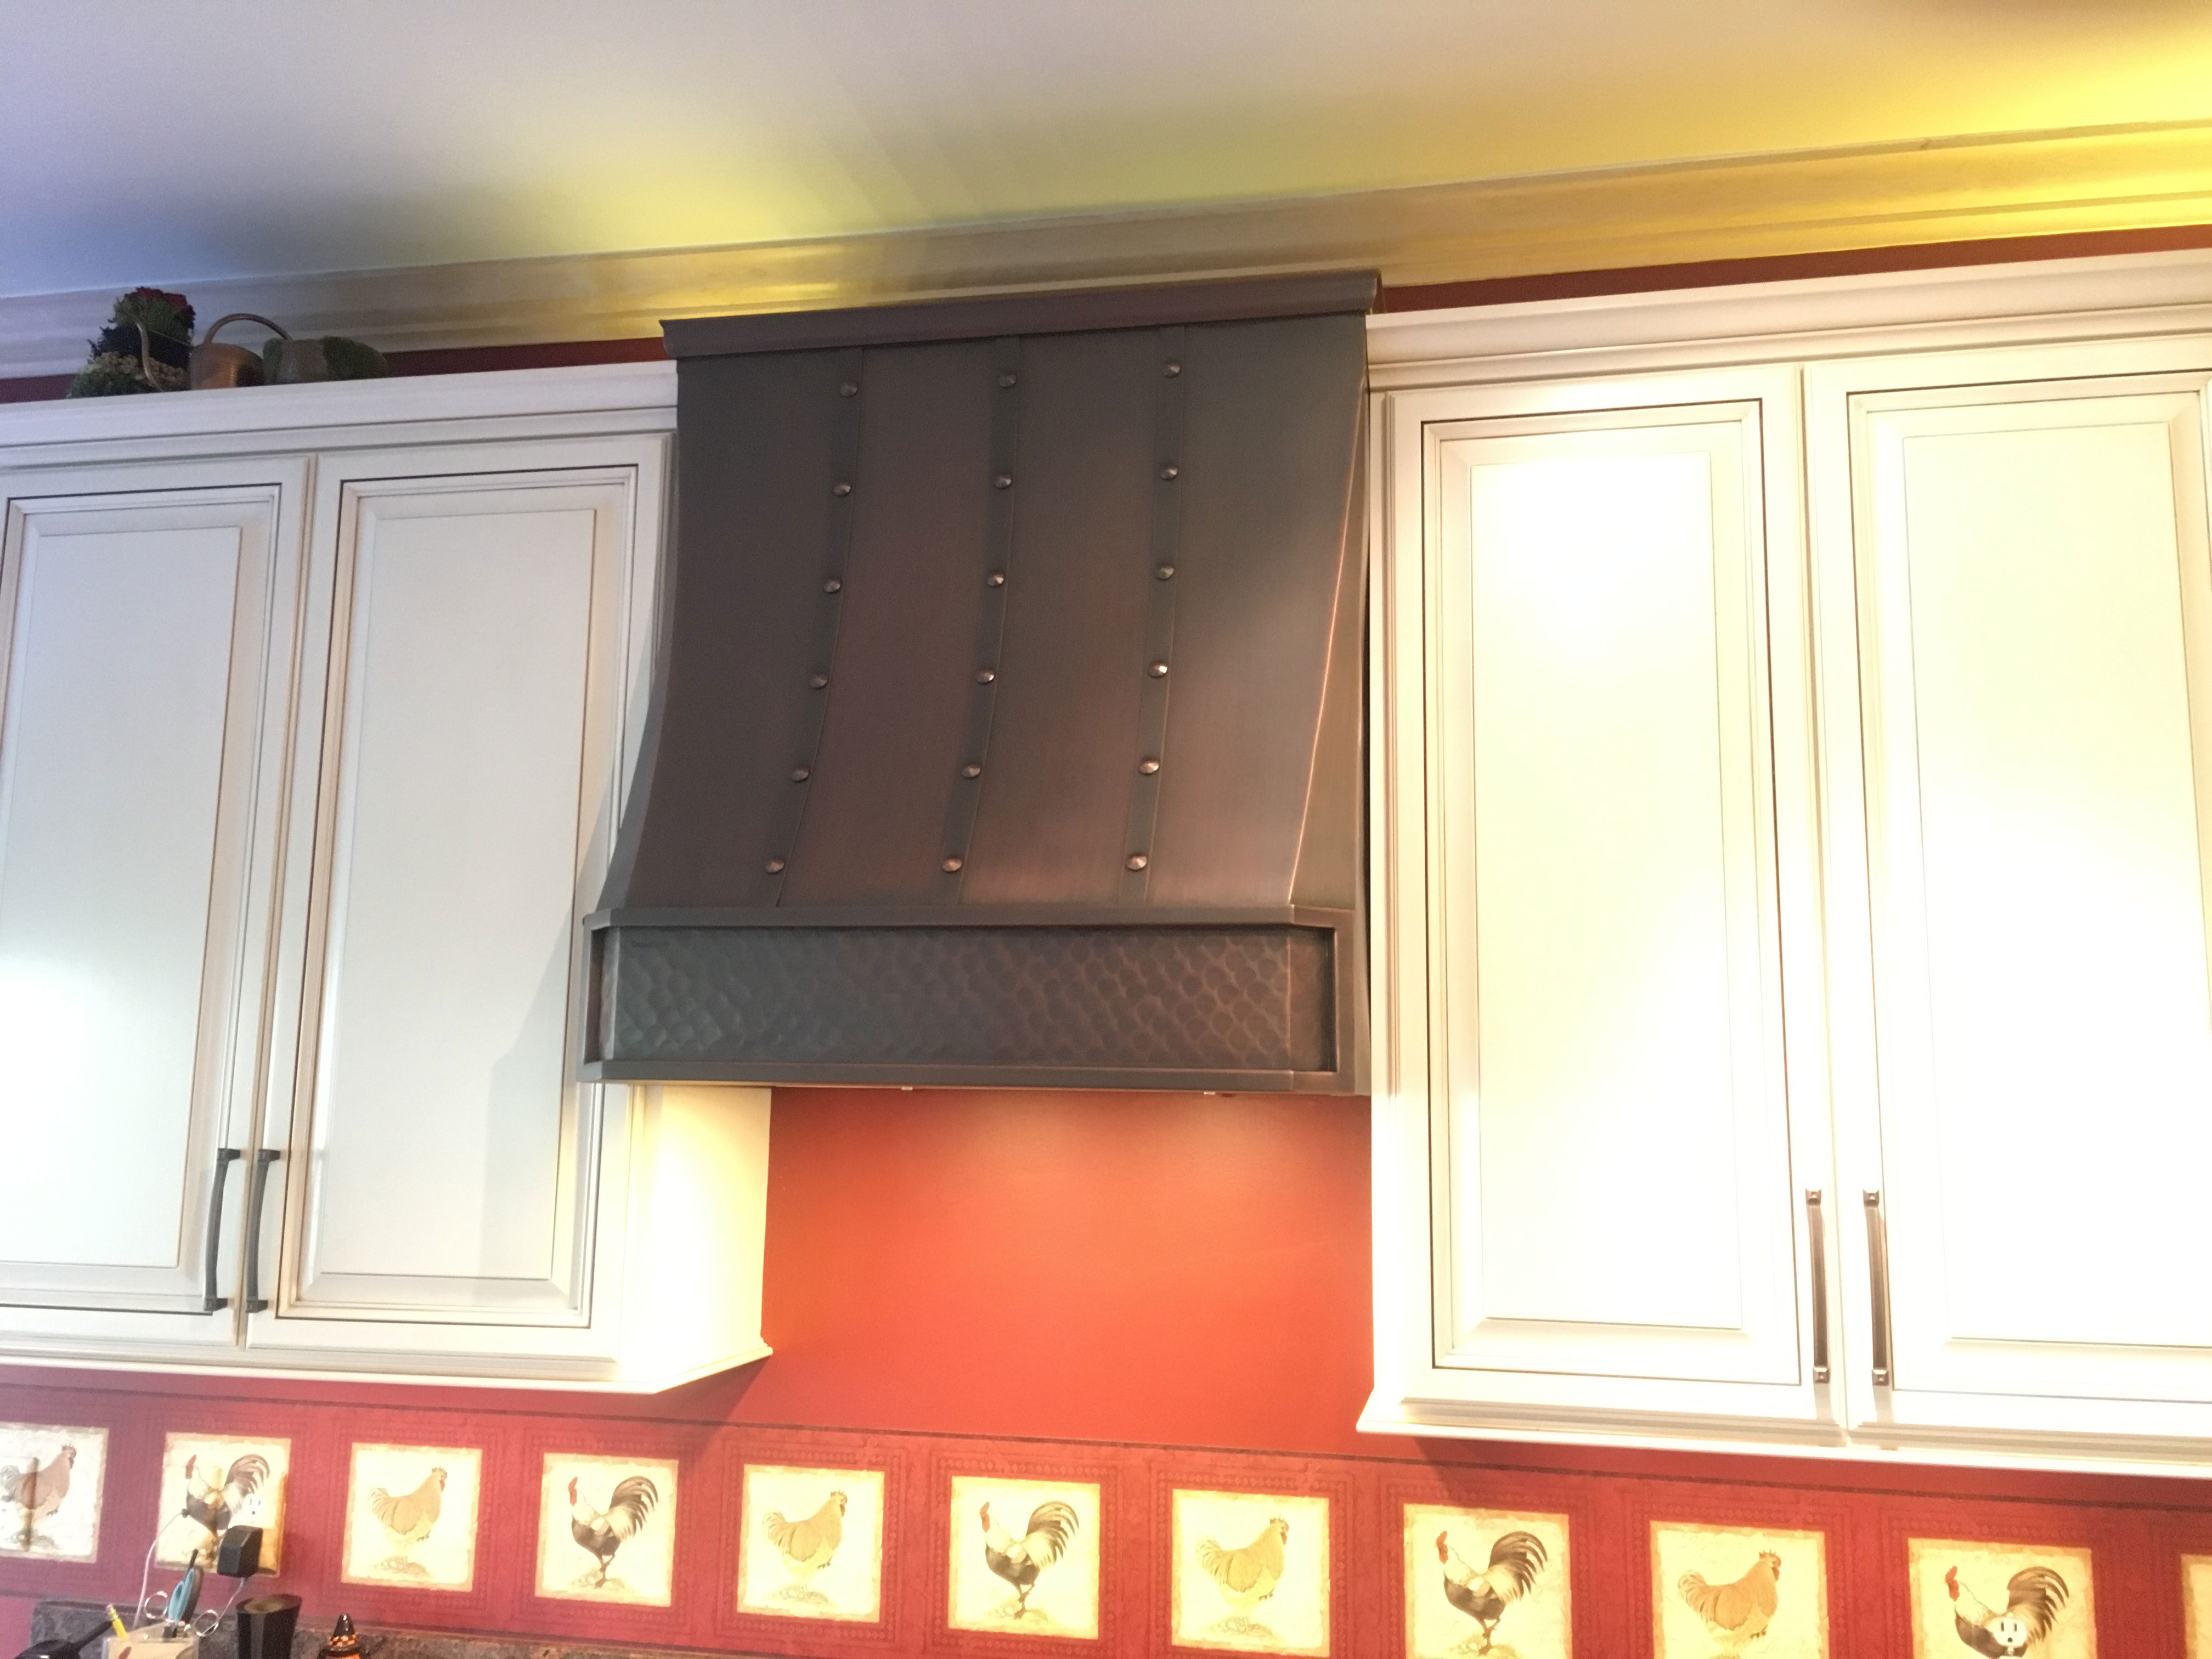 Discover inspiring kitchen design idea with range hood, featuring elegant white kitchen cabinets, esthetic appeal